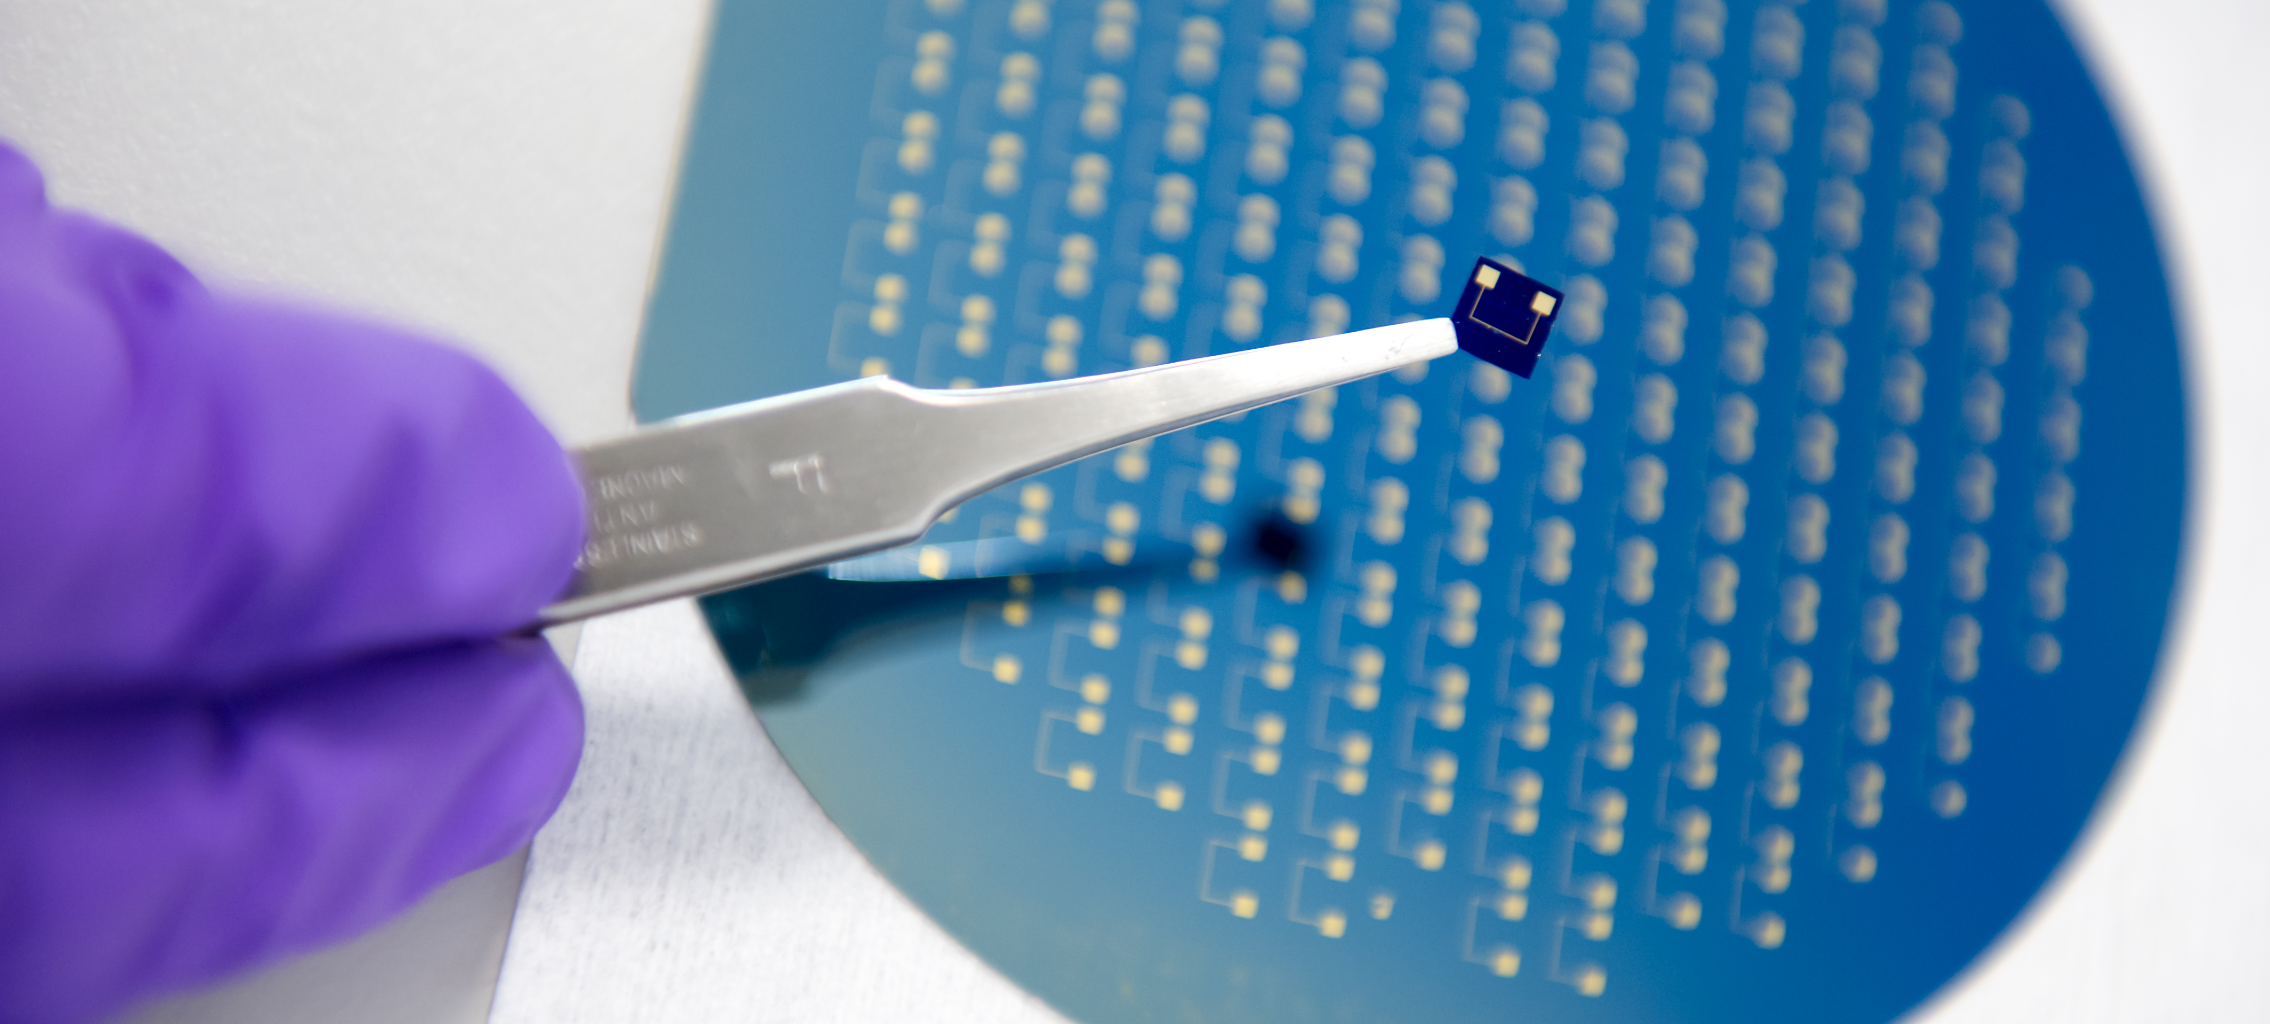 Silicon wafer in the background and three individual silicon chips held by the tweezer. The chips are nanopore sensors which are used for single protein and DNA detection.